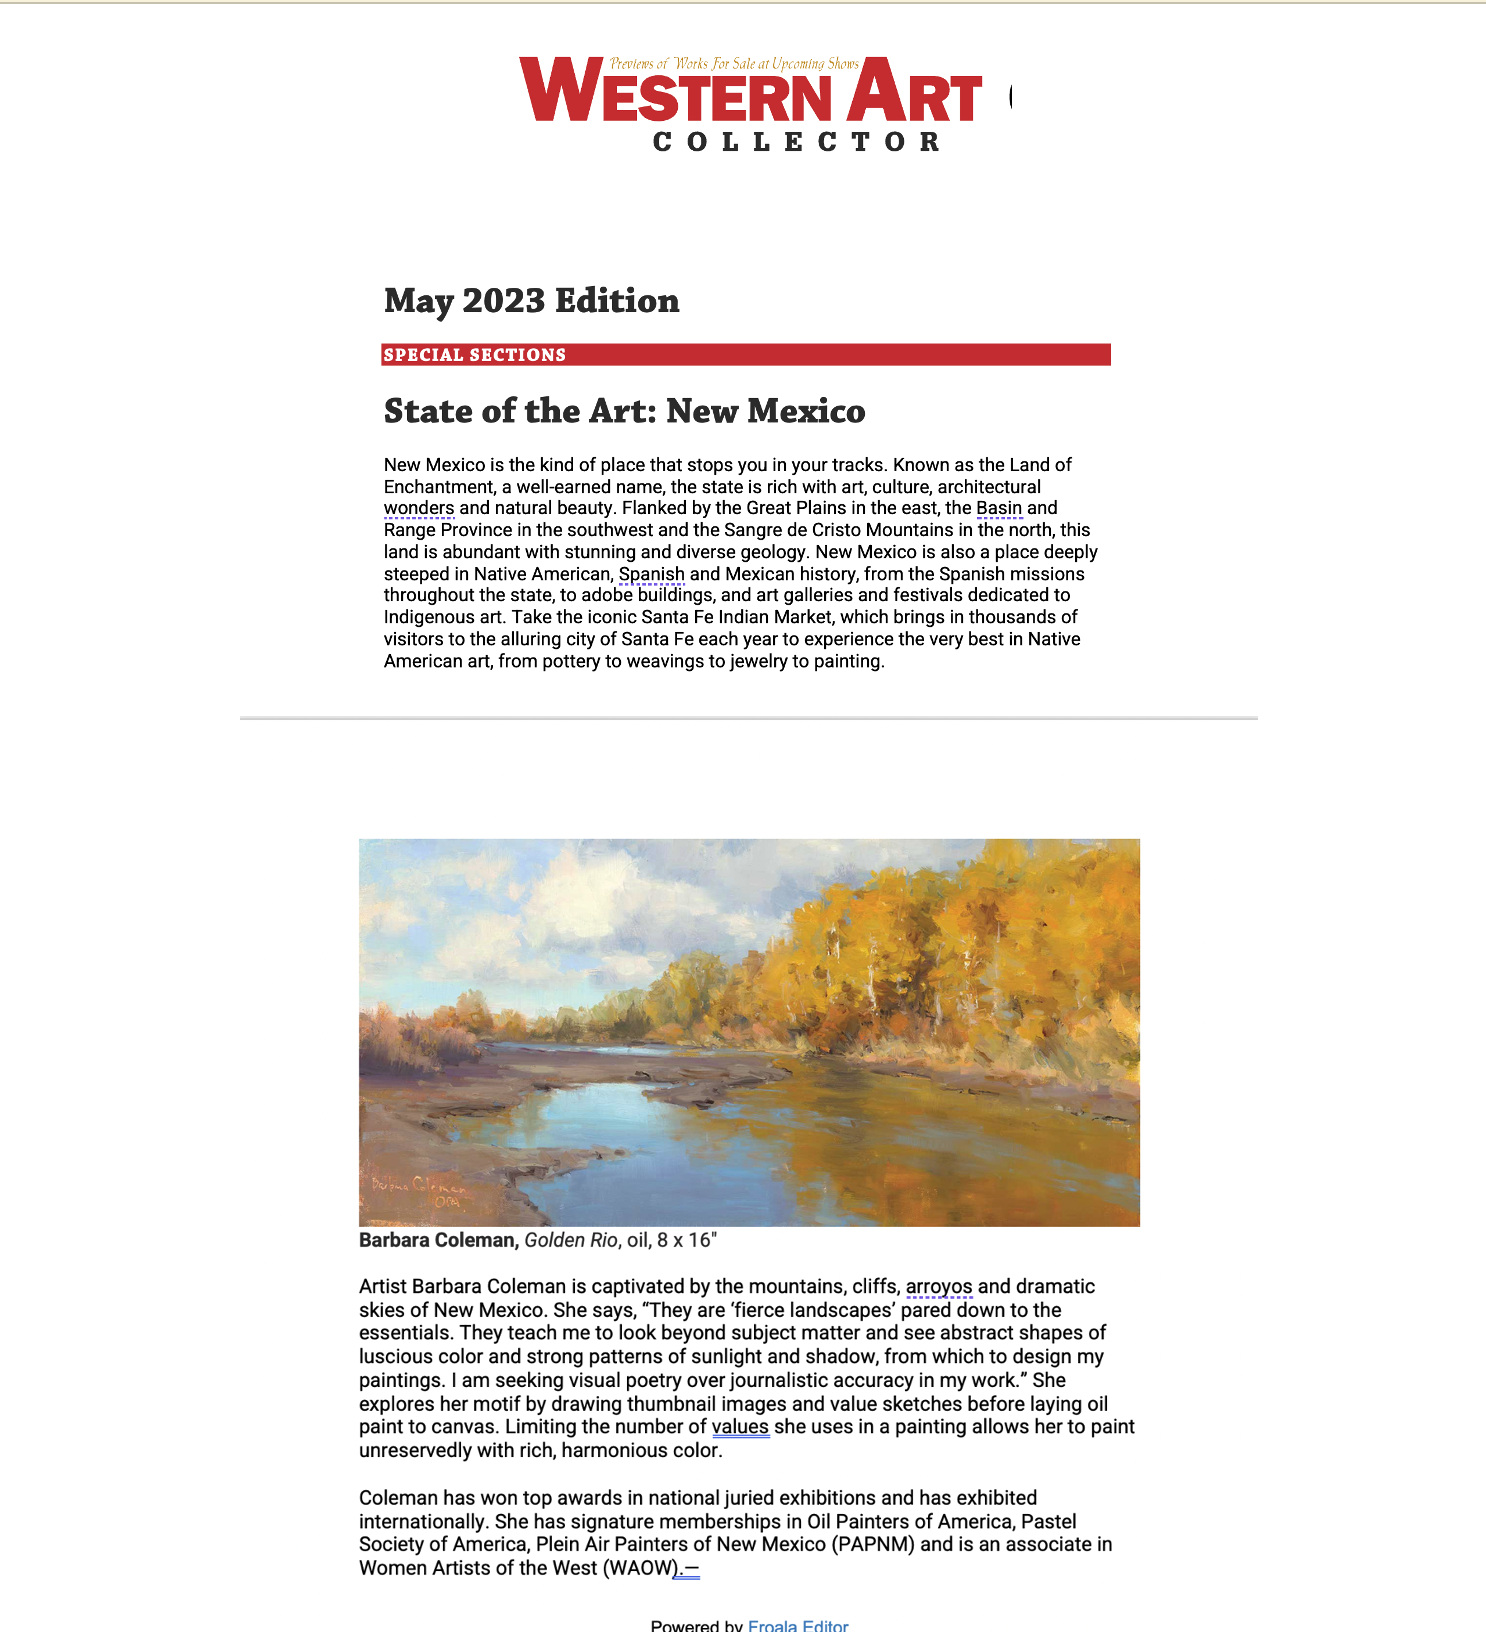 Western Art Collector, May 2023 Edition